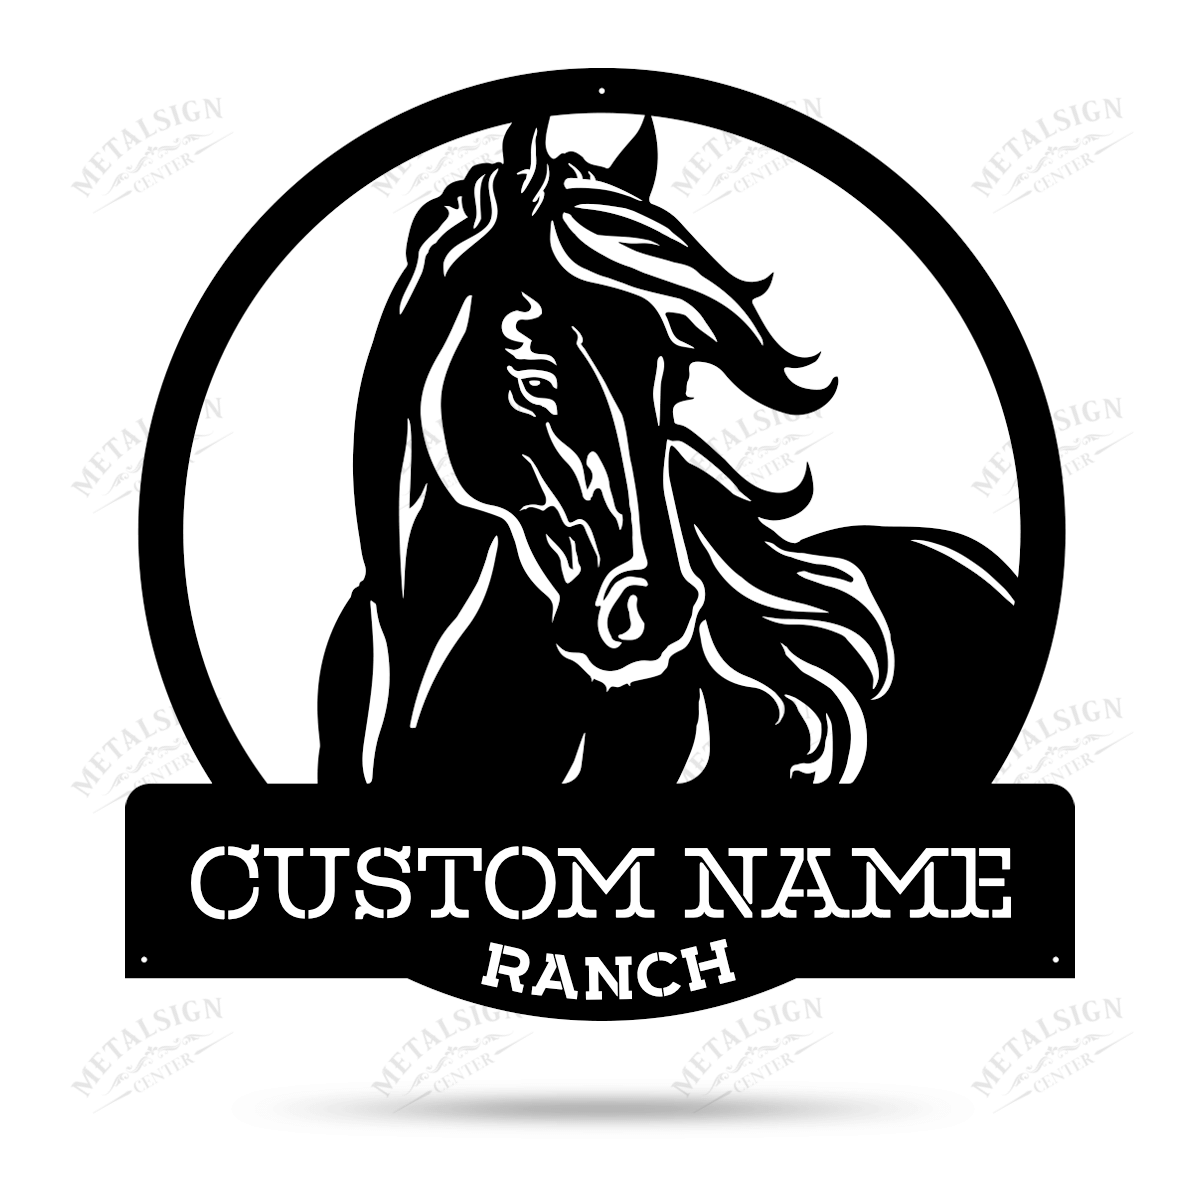 Personalized Horse Ranch Sign Monogram, Cut Metal Sign, Metal Wall Art, Metal House Sign, Metal Laser Cut Metal Signs Custom Gift Ideas 12x12IN